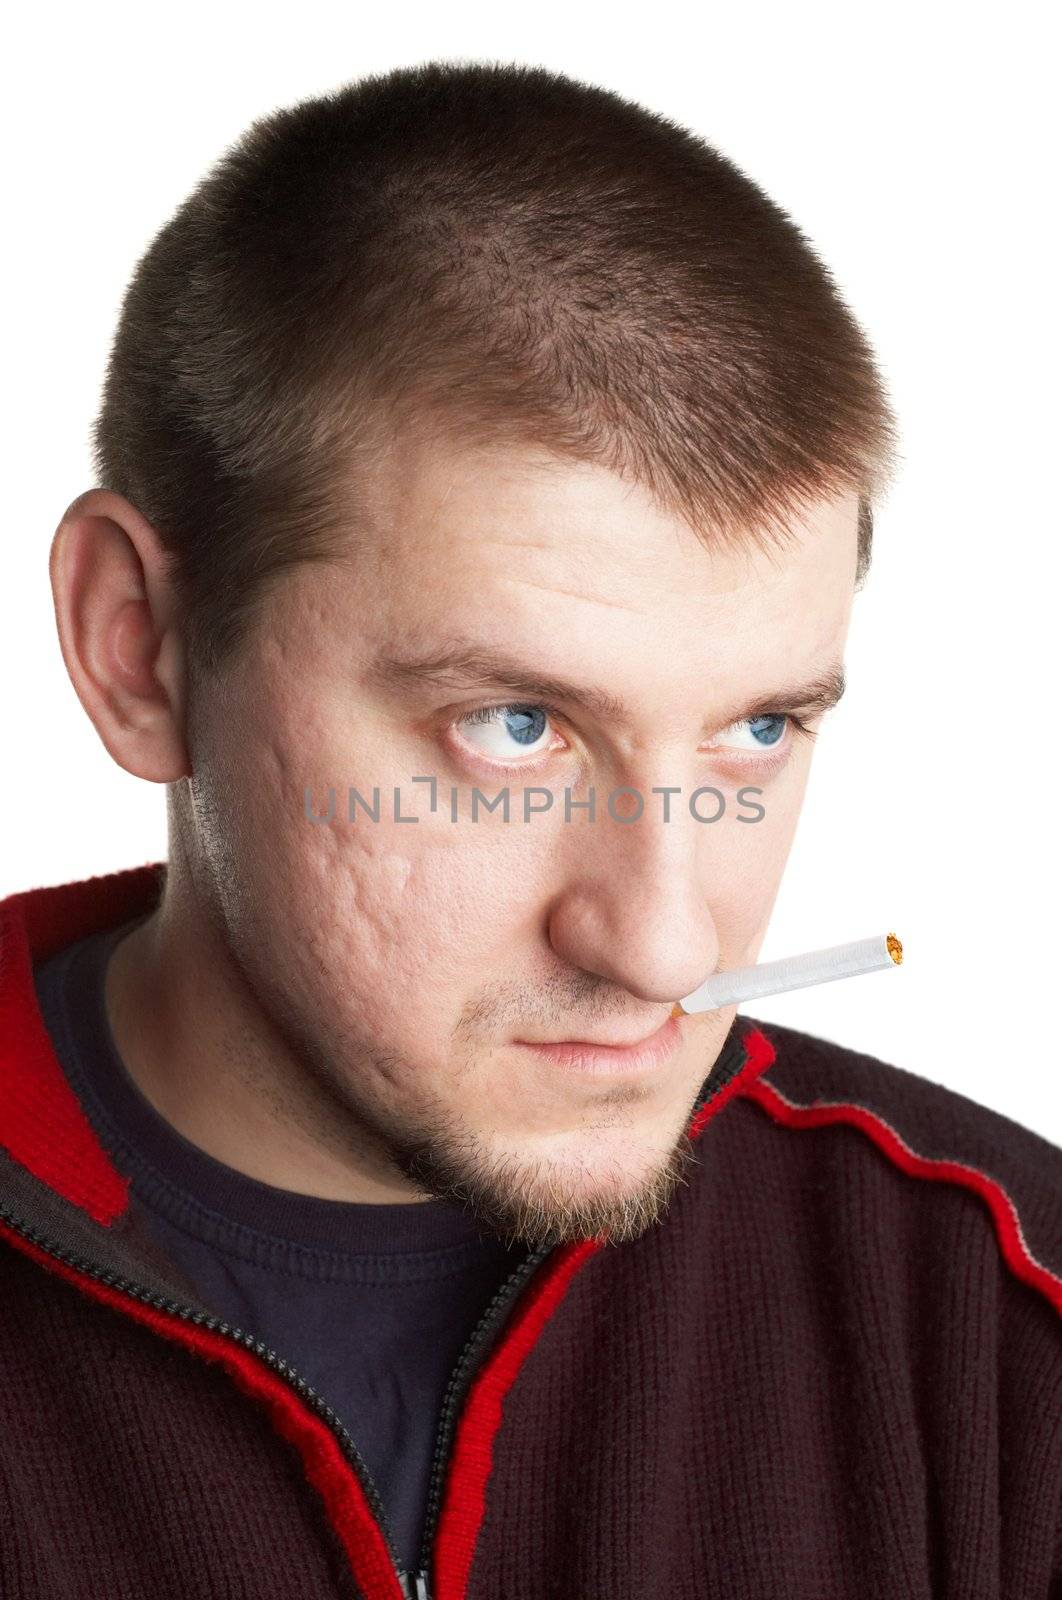 casual short haired young man posing with cigarette